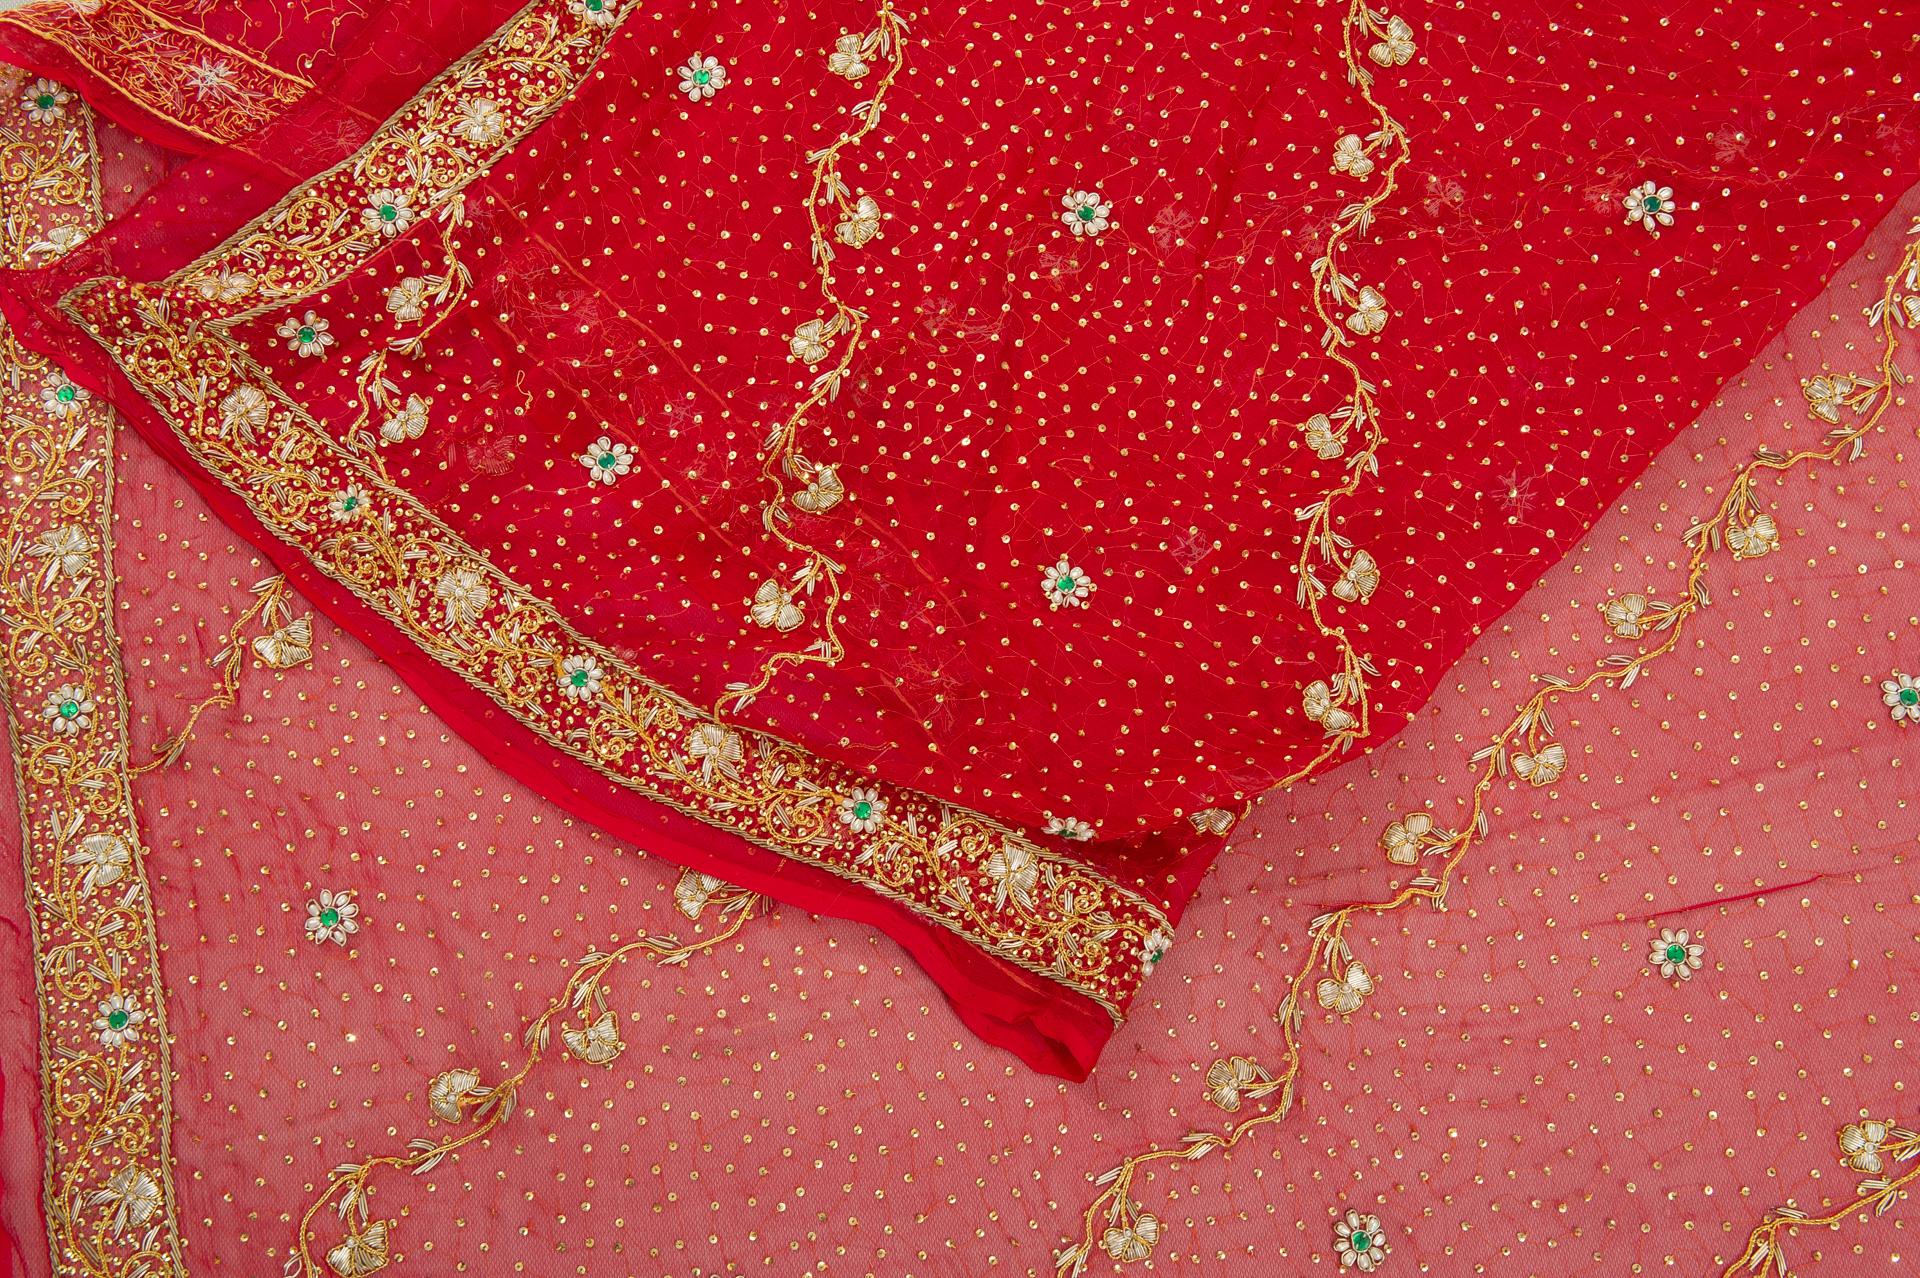 Agra Indian Bridal Veil as a Shawl For Sale